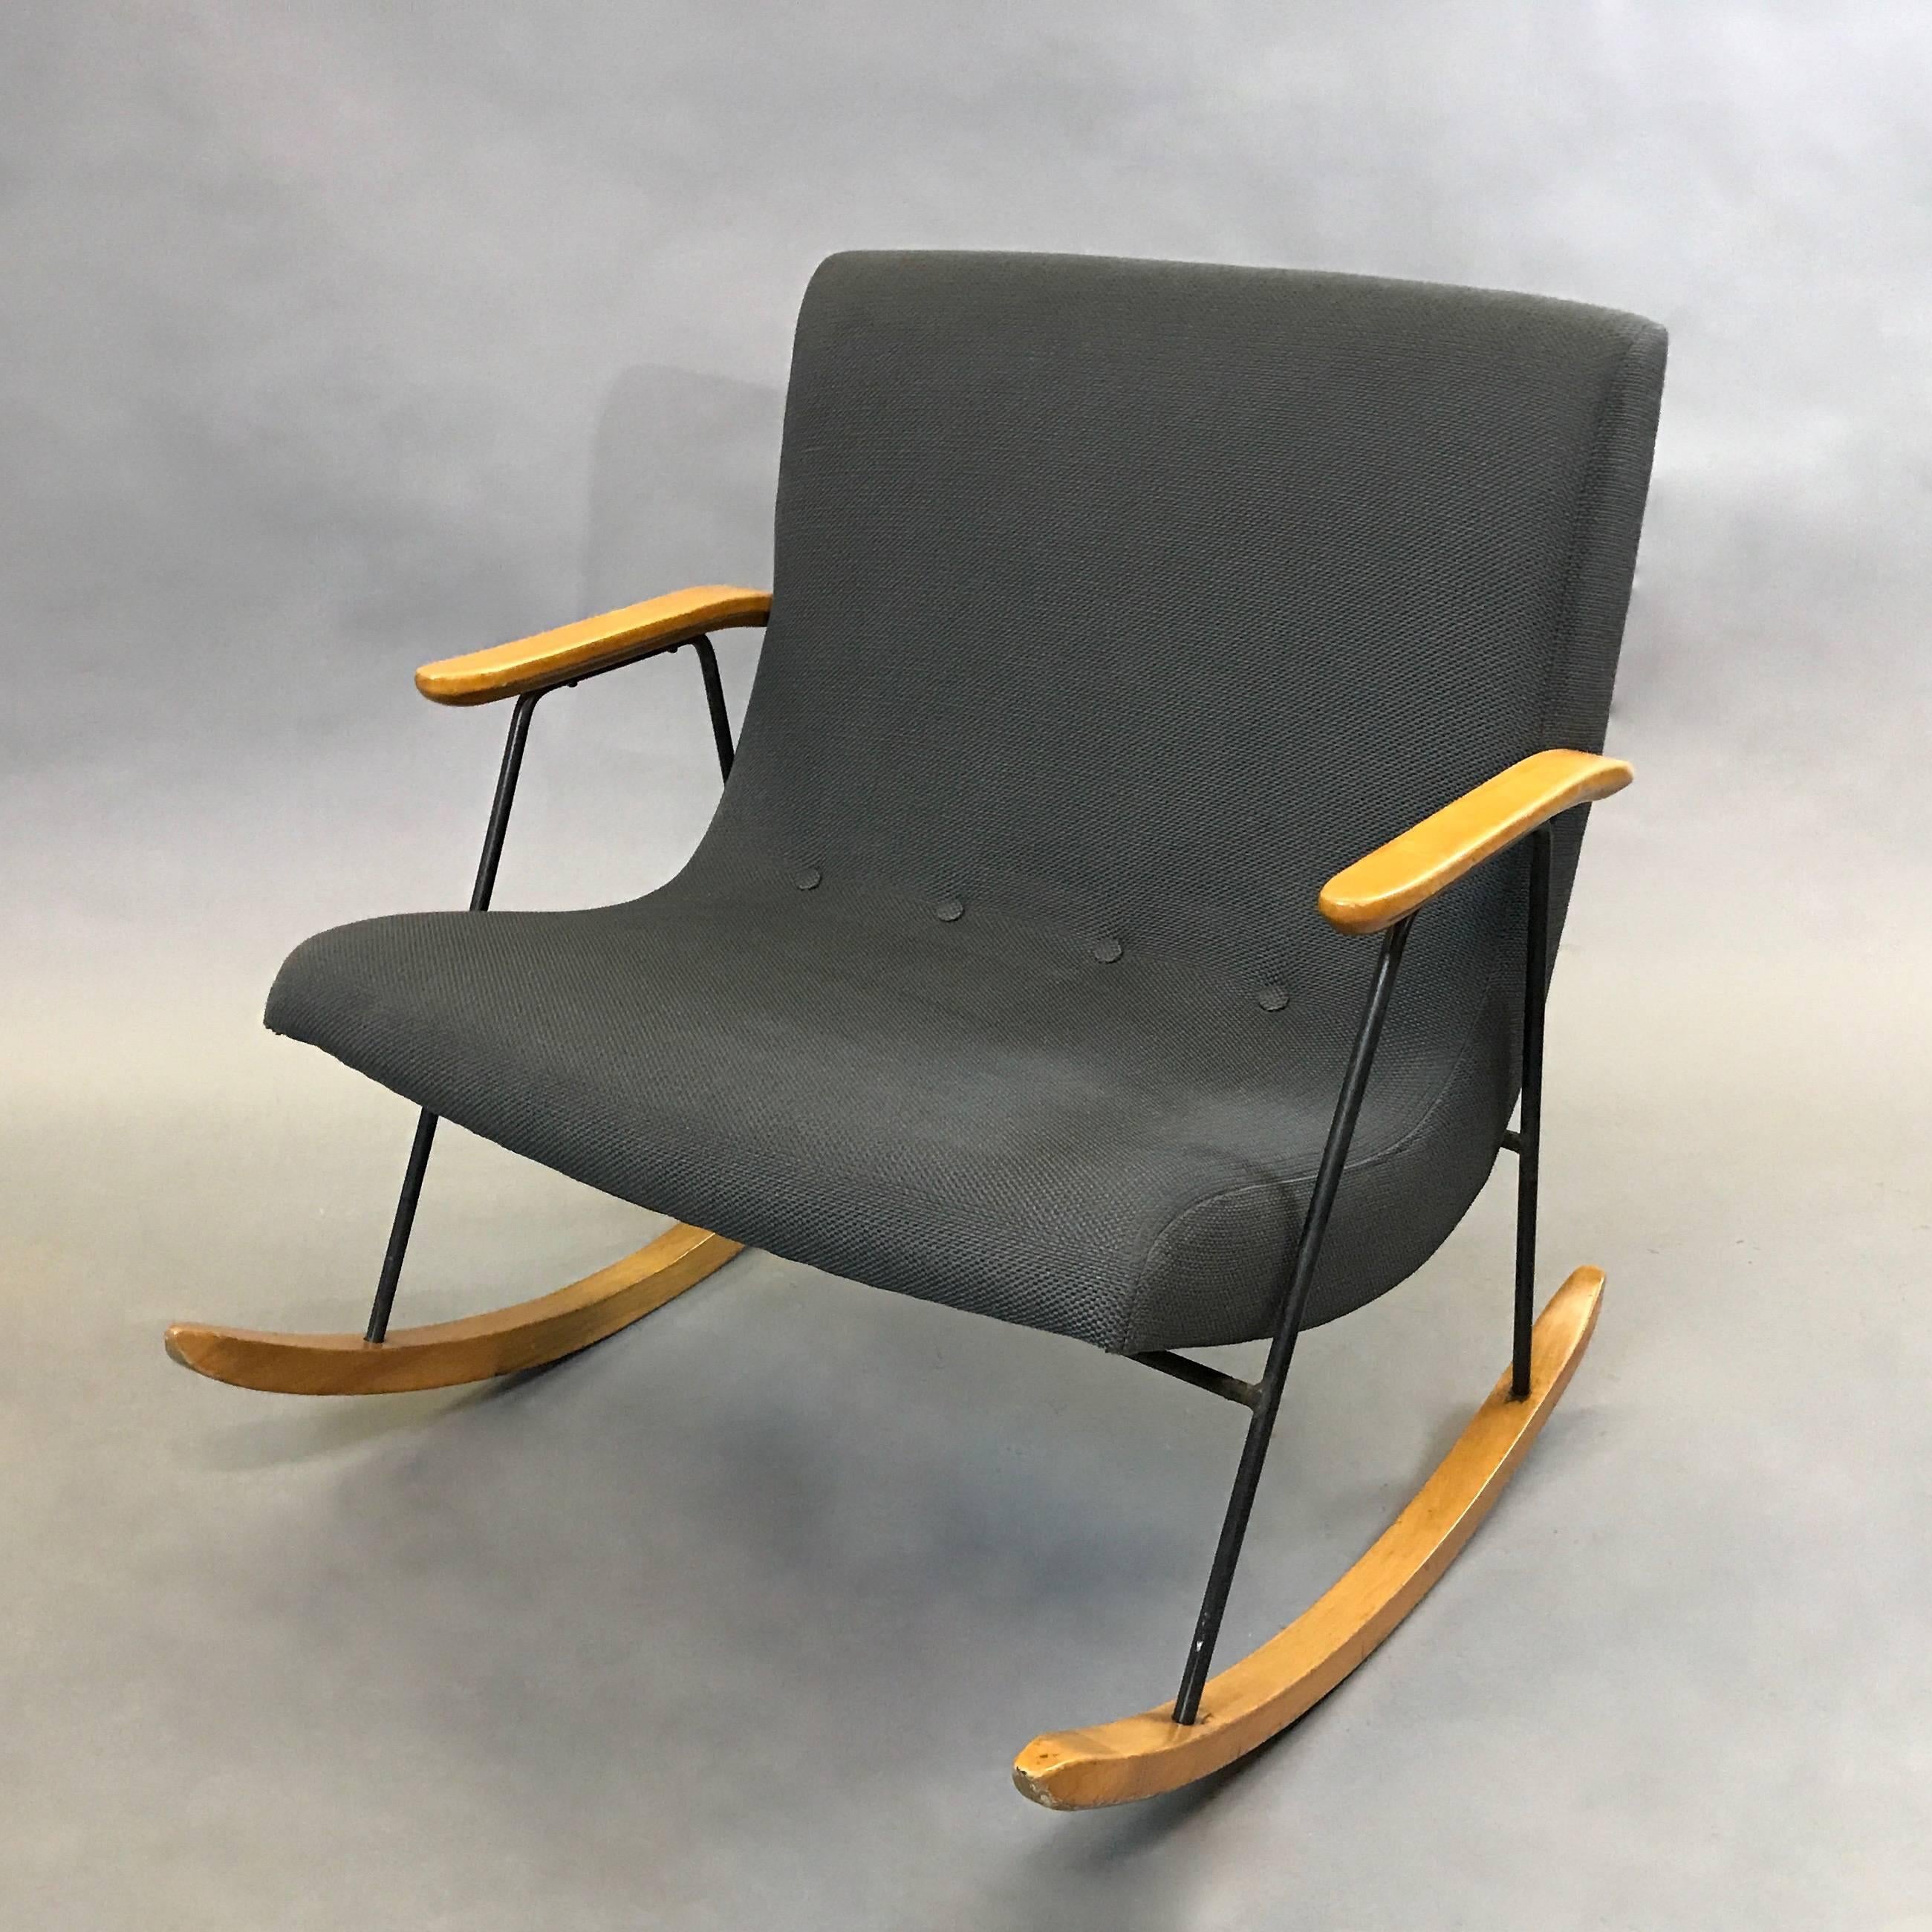 Rare, Mid-Century Modern, “Ozzy” rocking chair designed by Milo Baughman for Thayer Coggin has a sculpted upholstered seat cradled in a maple and wrought iron frame.